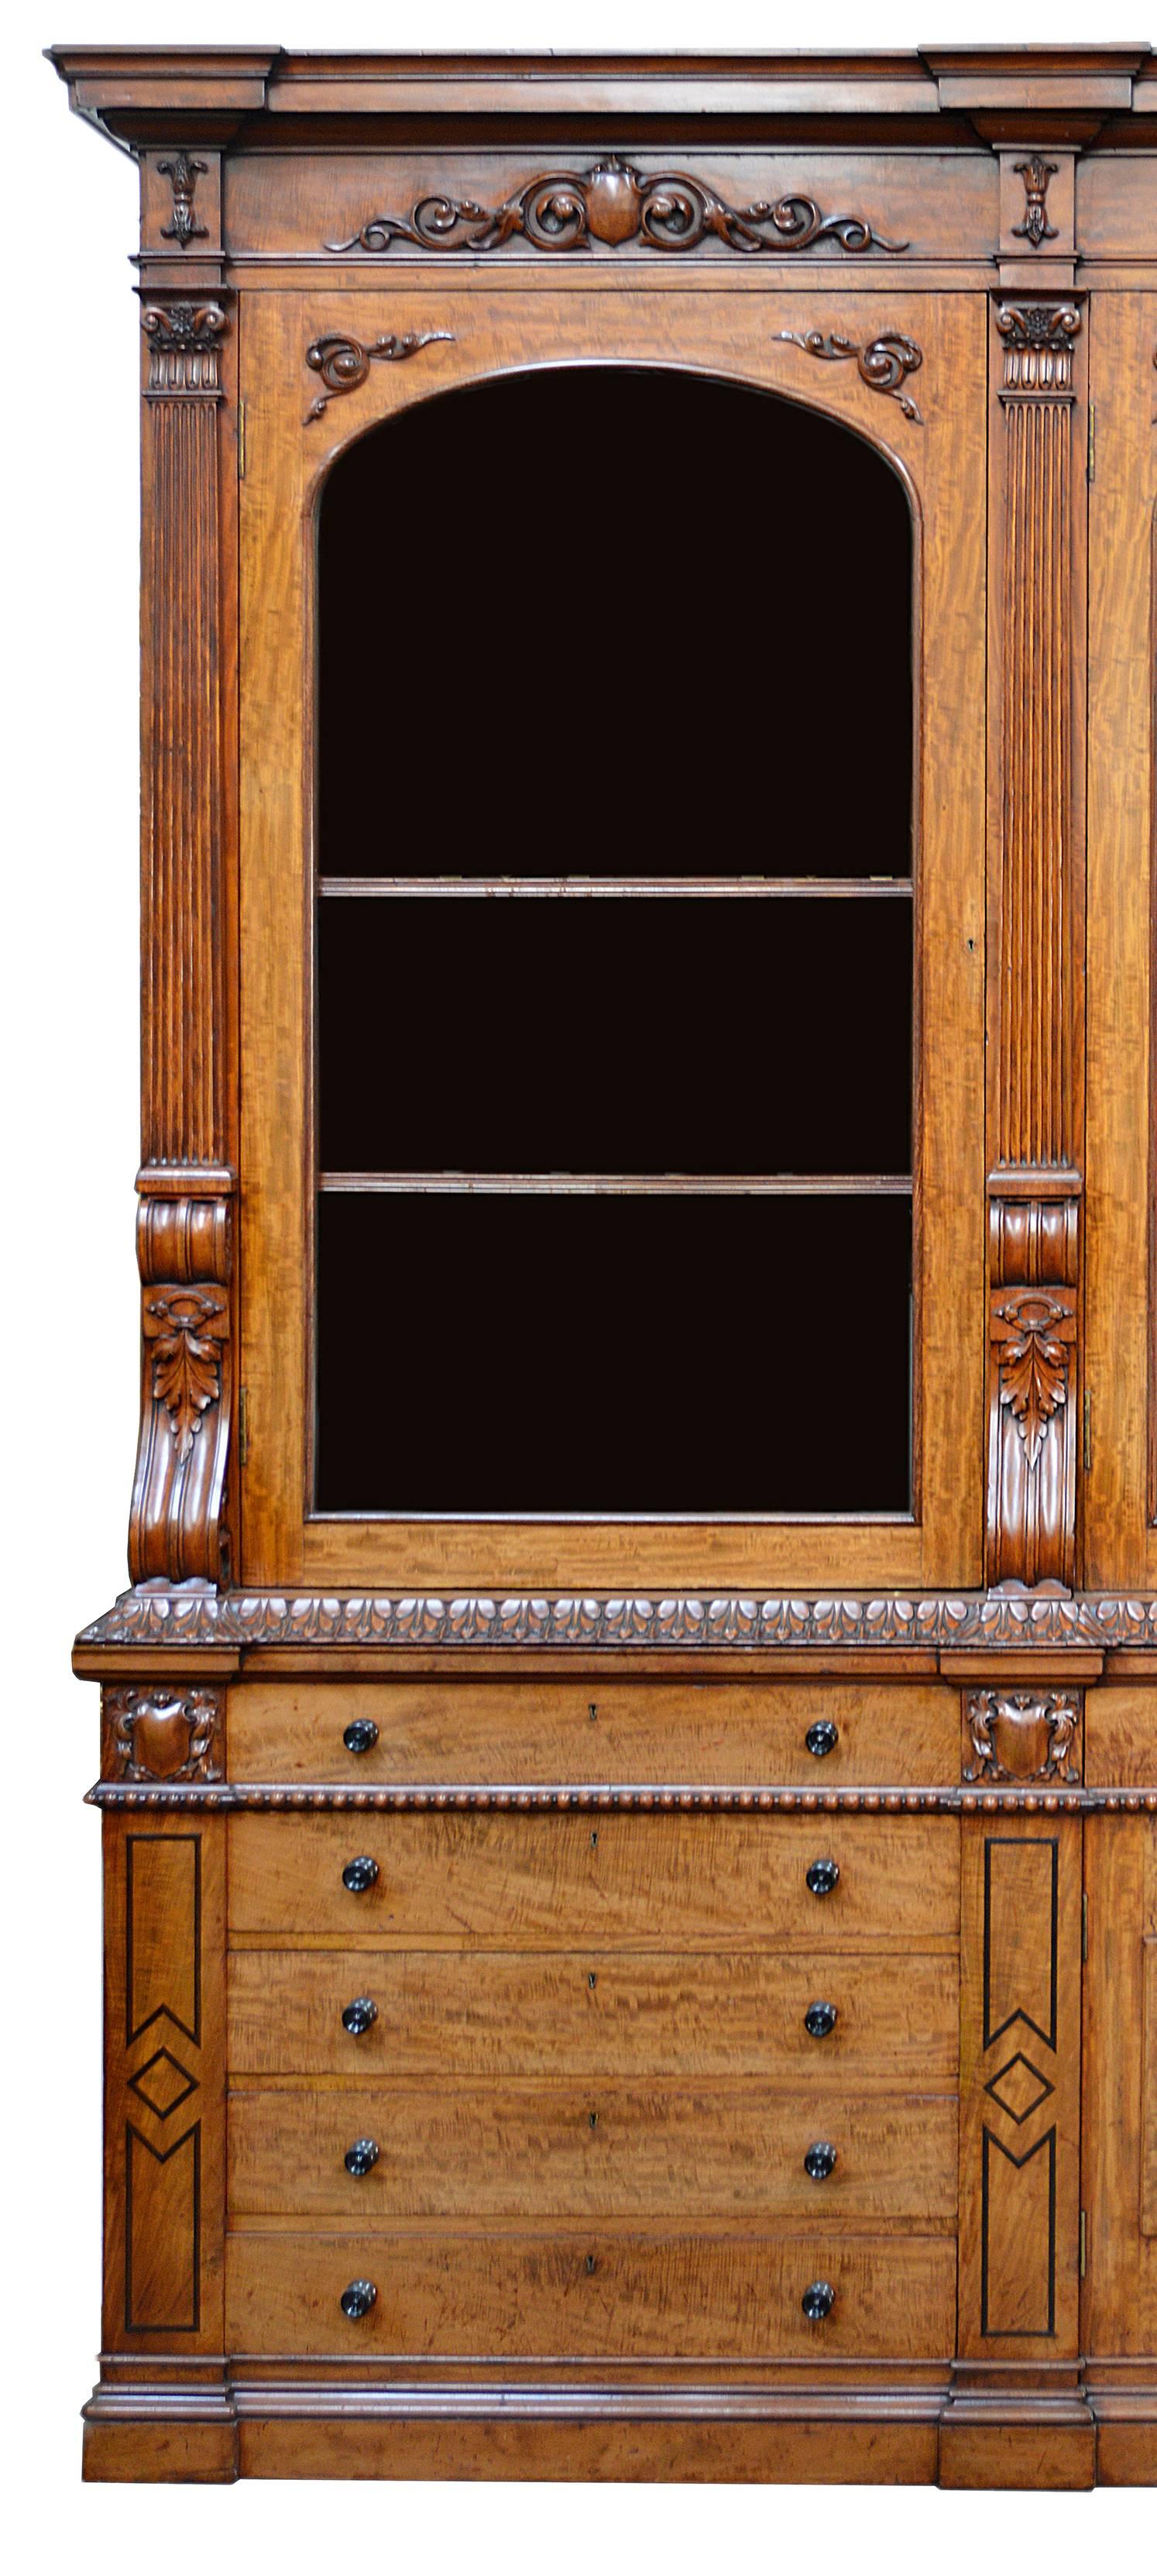 A very good quality late Regency period mahogany library bookcase. Having carved wood, fluted and ebony string inlaid decoration. Five glazed doors each open to reveal adjustable shelves. Five drawers on either side and frieze drawers above six